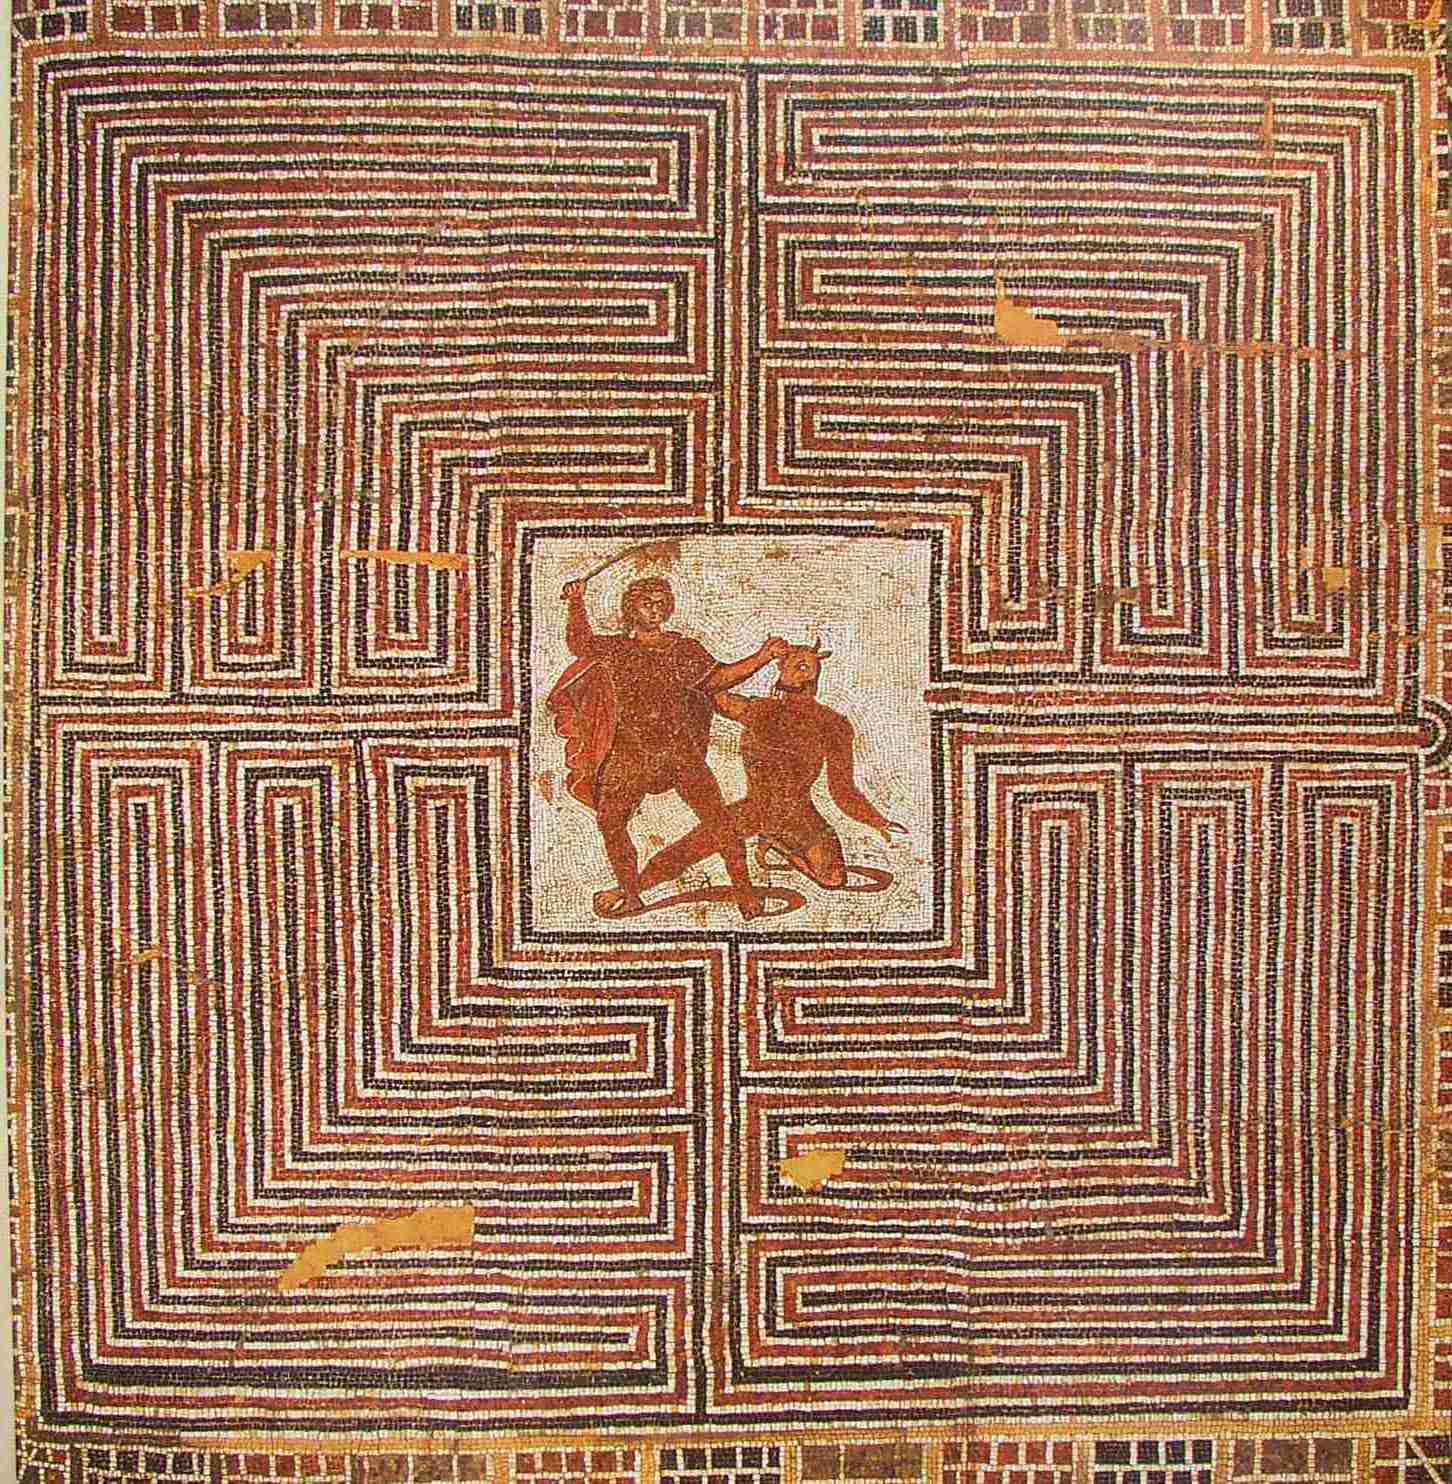 Fig. ra2: Salzburg
Multiple lane labyrinth with Theseus and the Minotauros in the centre.